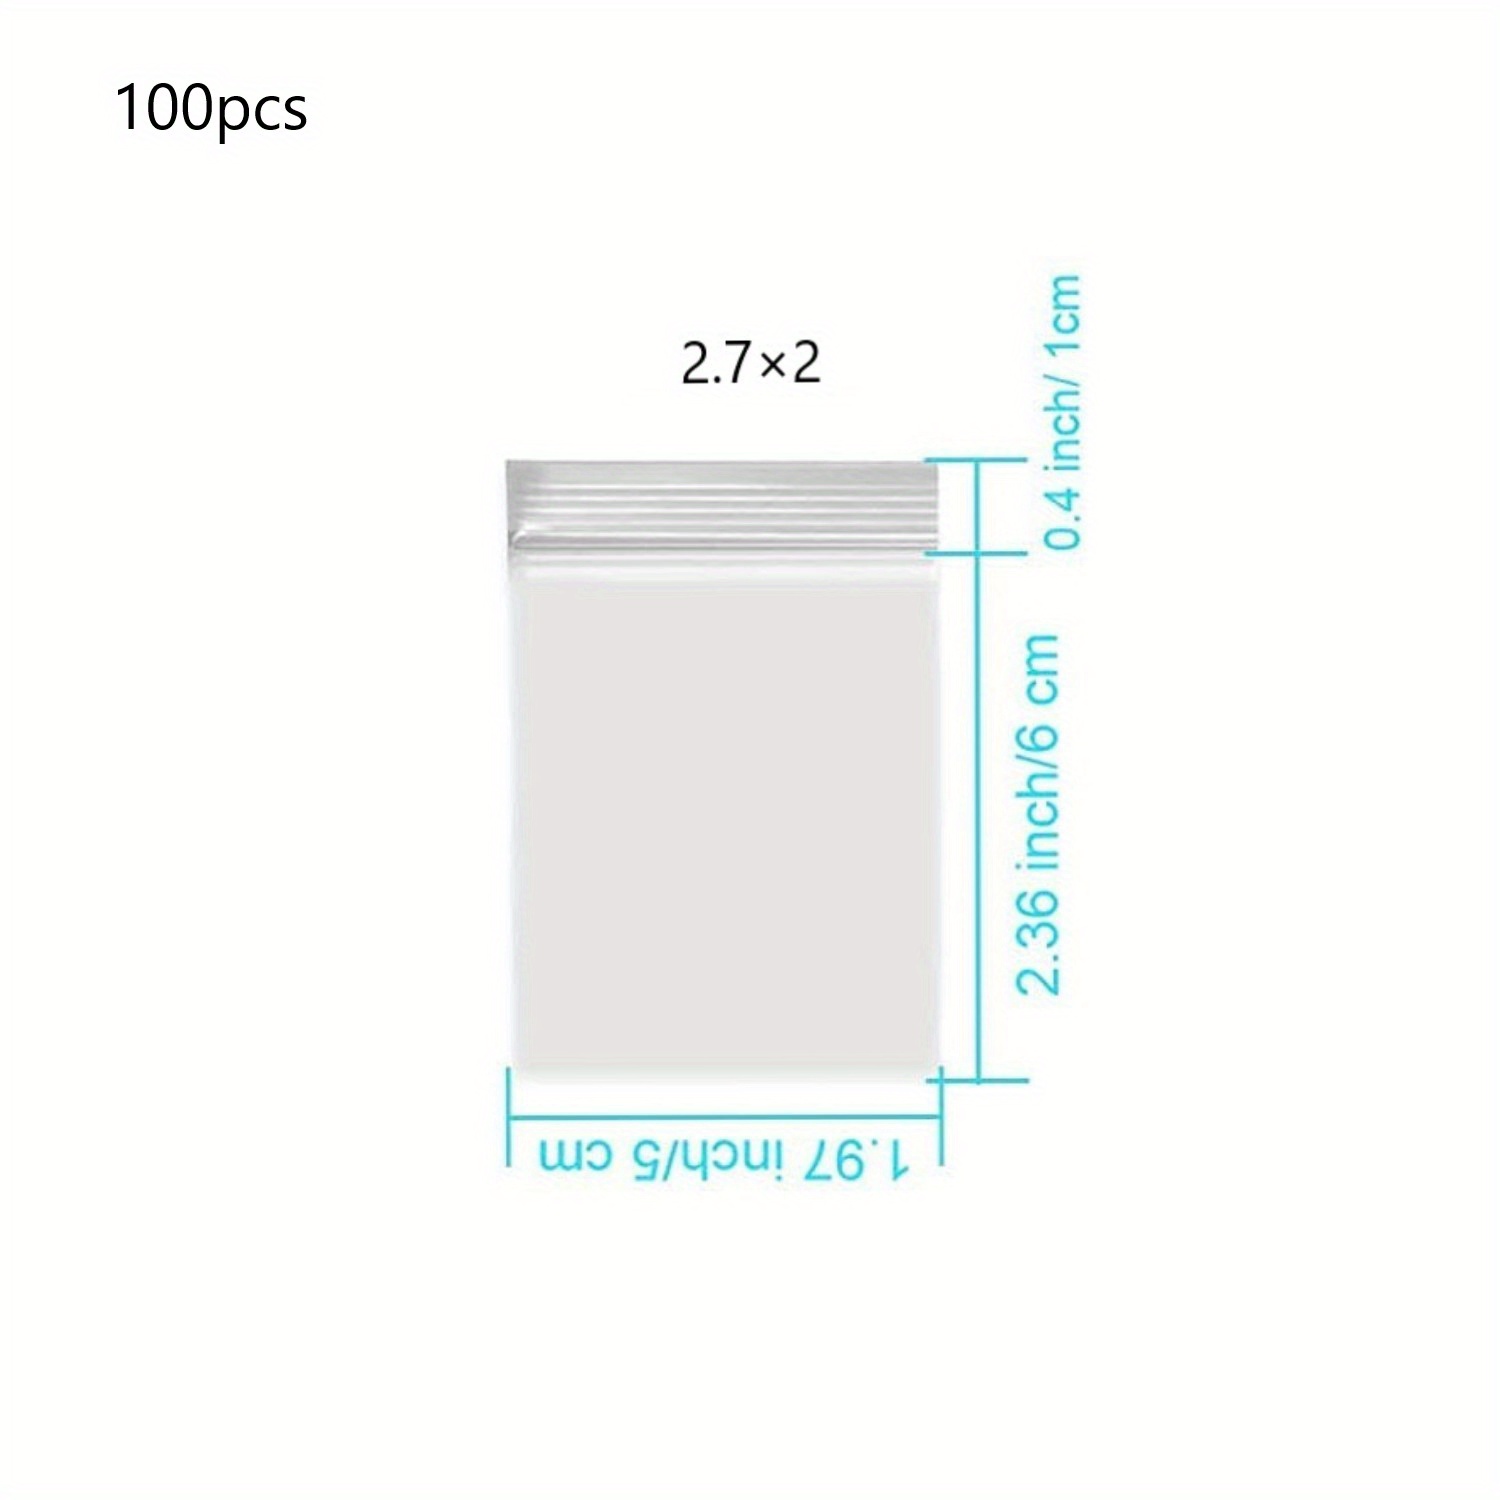 100pcs Small Plastic Bags, 1 x 2 2 Mil Reclosable Clear Mini Zipper Poly  Baggies for Pills, Beads, Jewelry Parts, Small Items